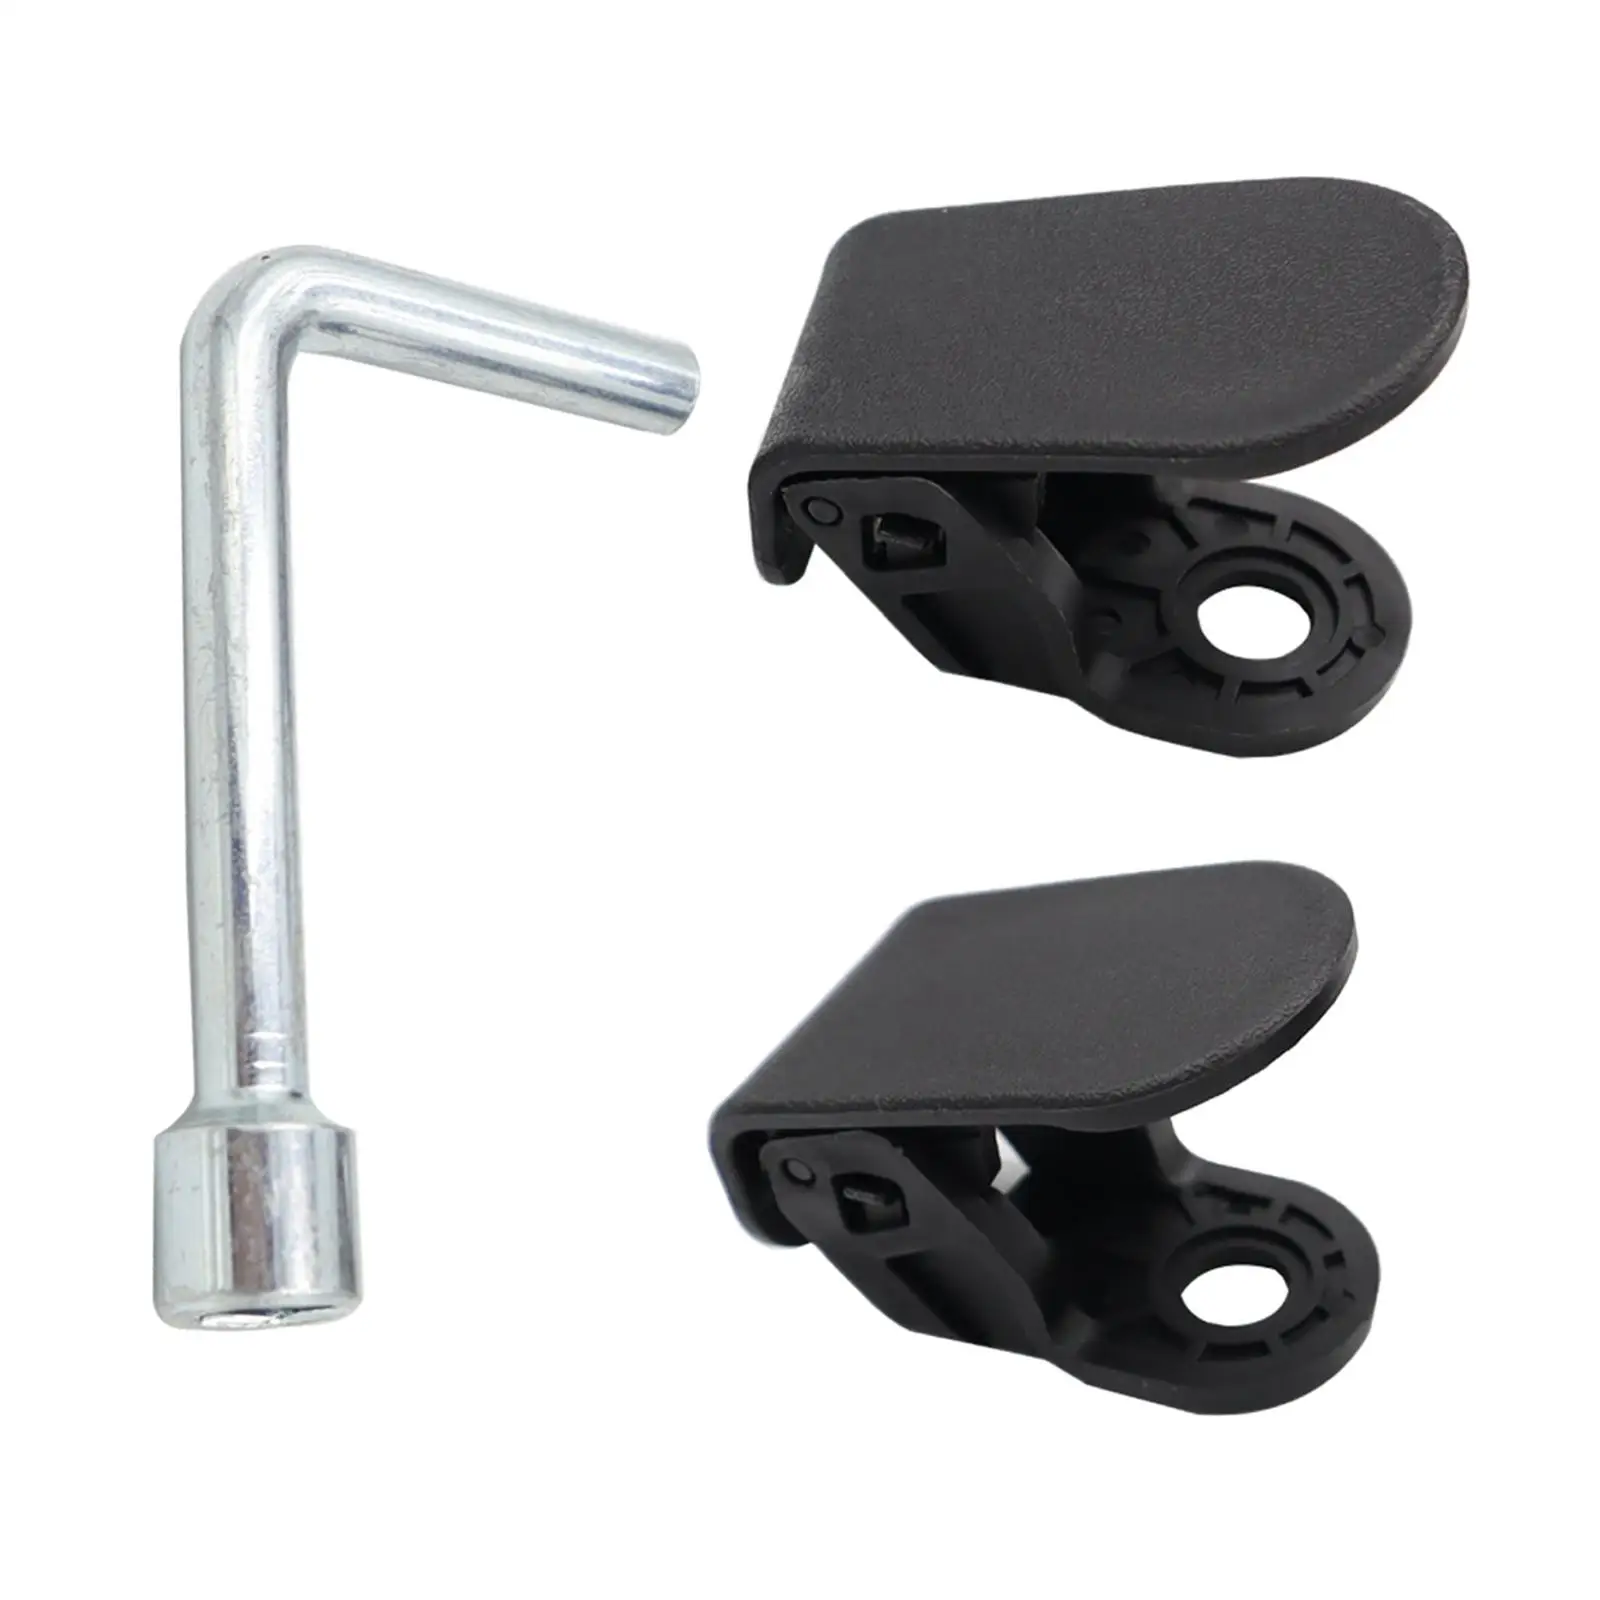 2Pcs Front Trunk Hook with Wrench Grocery Bag Hook Hanger for Tesla Model 3 2019 2020 Car Accessories Stable Performance